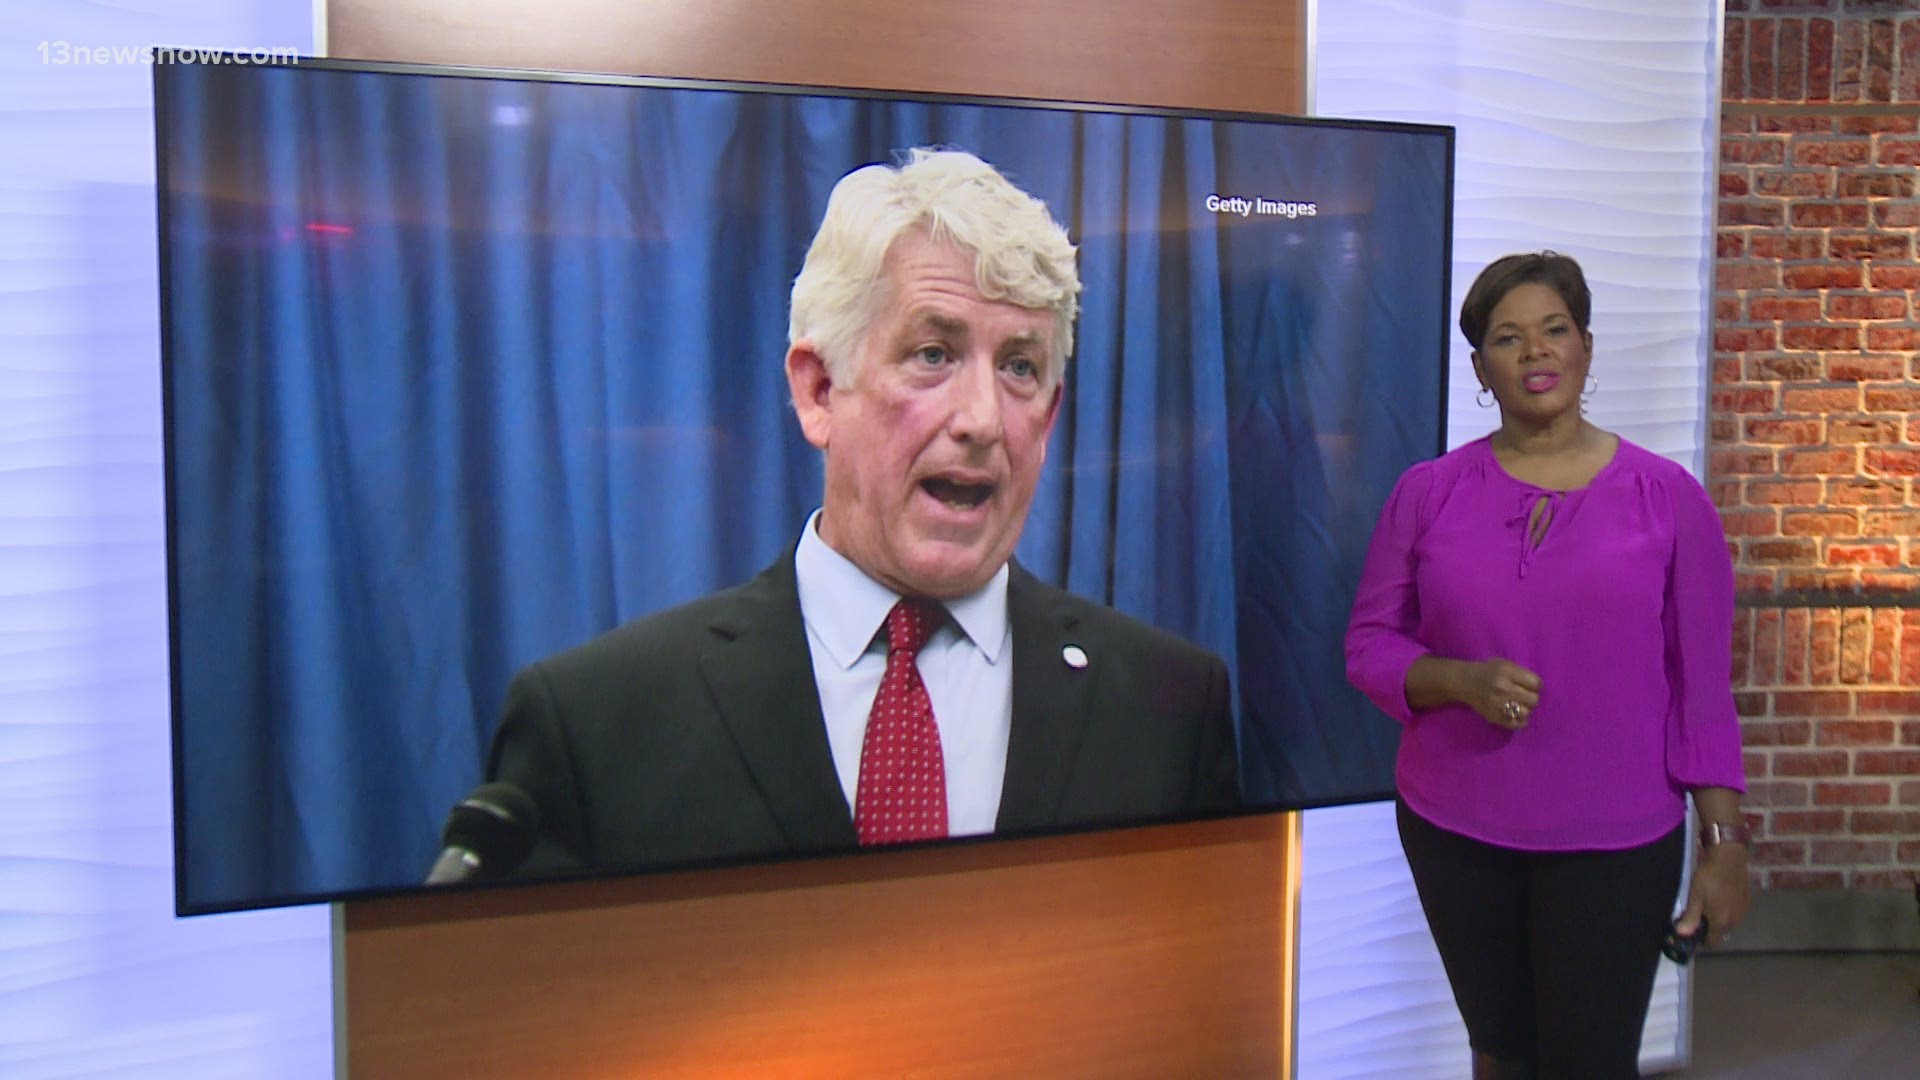 Mark Herring said he wants to continue his "fight for justice, equality, and opportunity for all Virginians."